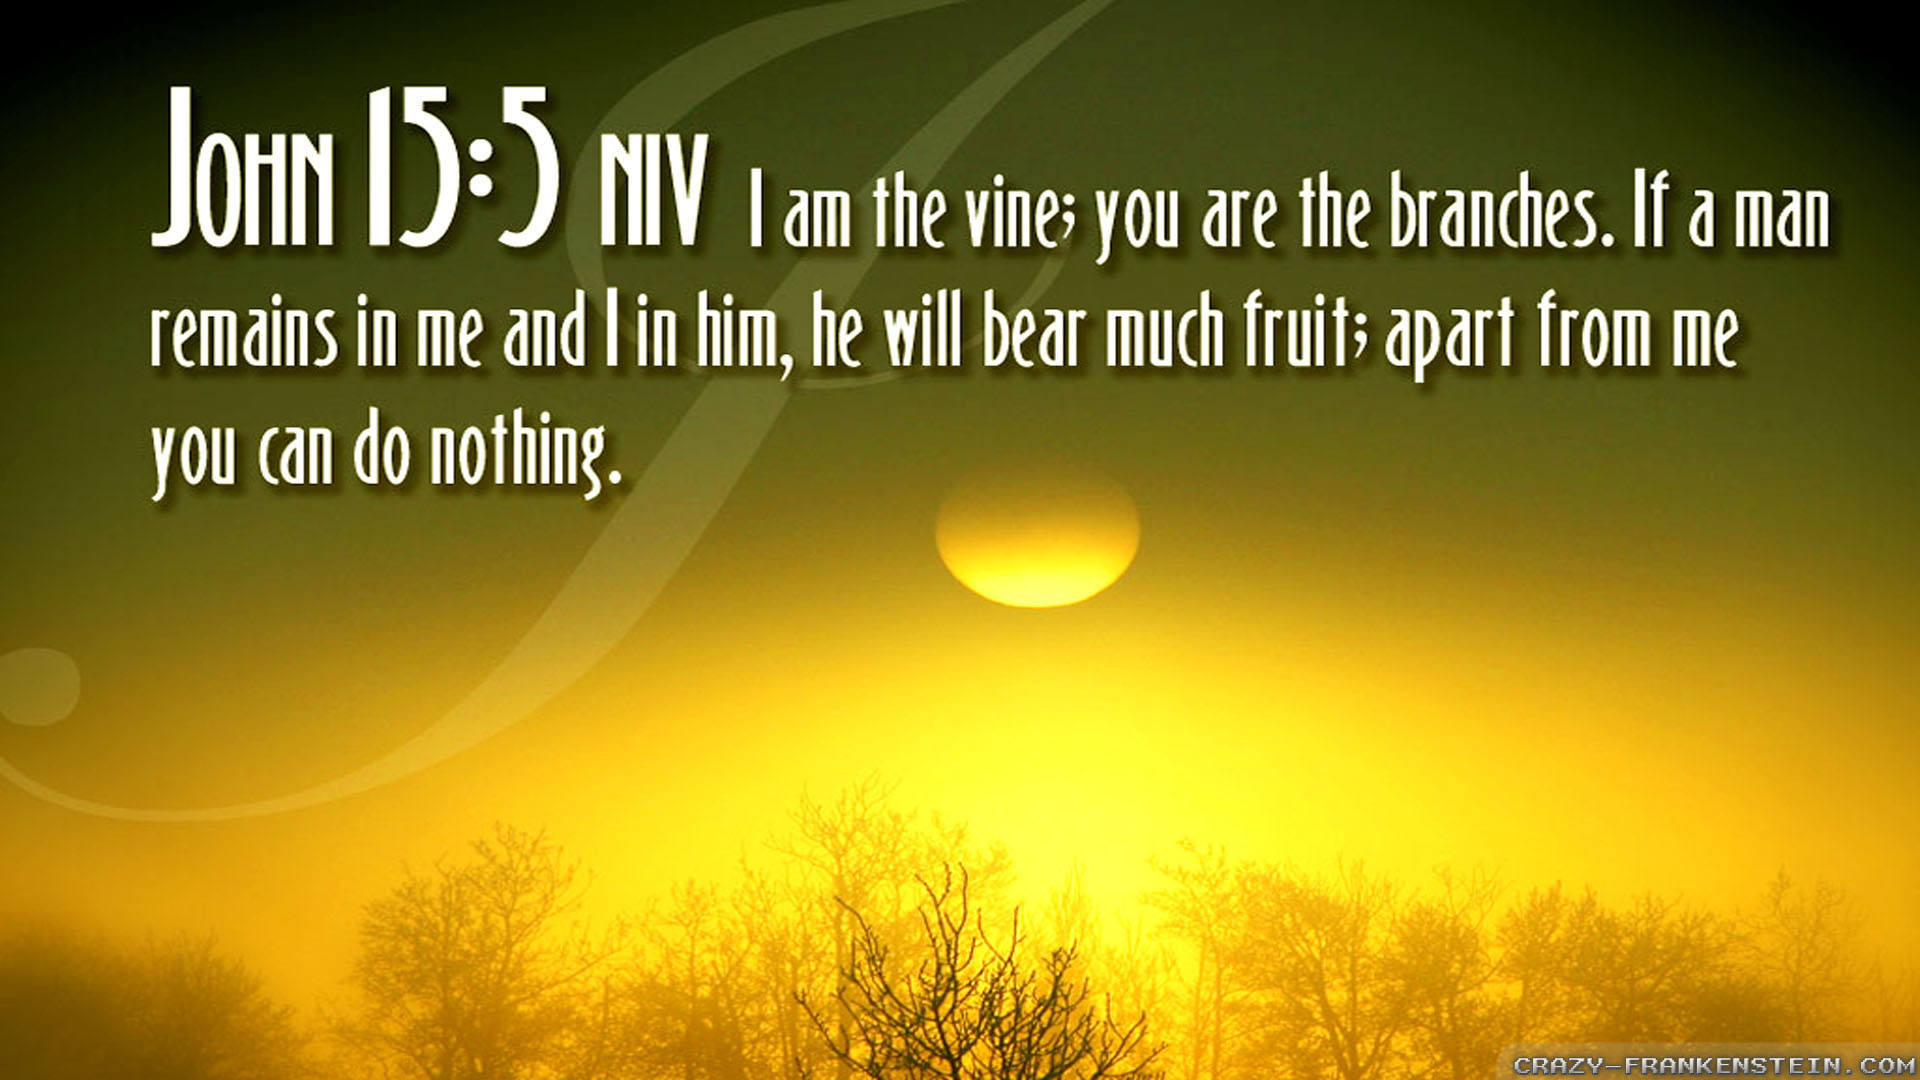 1920x1080 BIBLE VERSES quote text poster bible verses g wallpaper background 